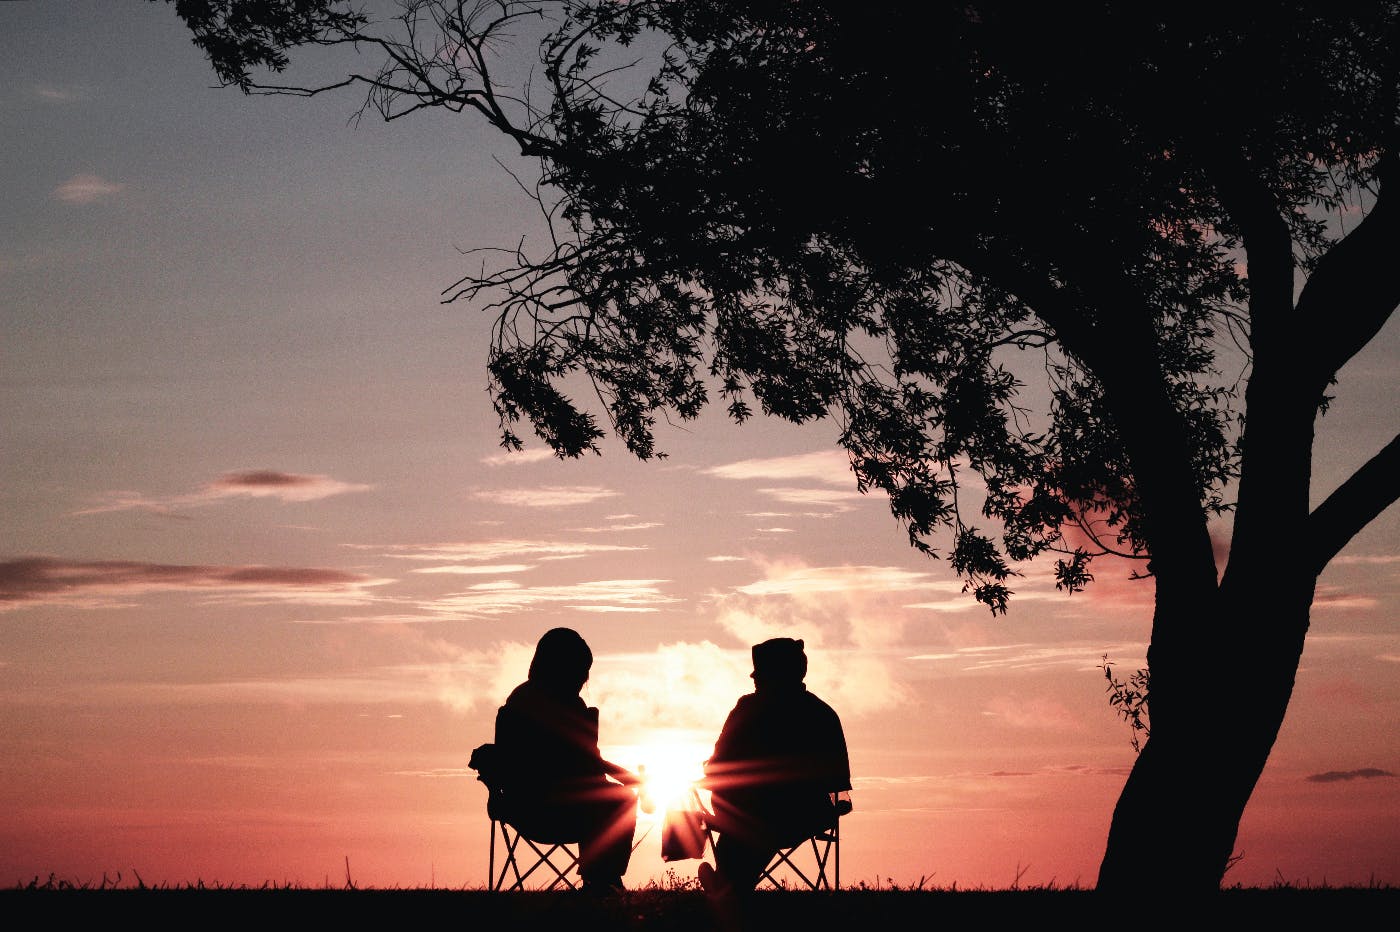 Two people in silhouette under a tree at sunset having a conversation.